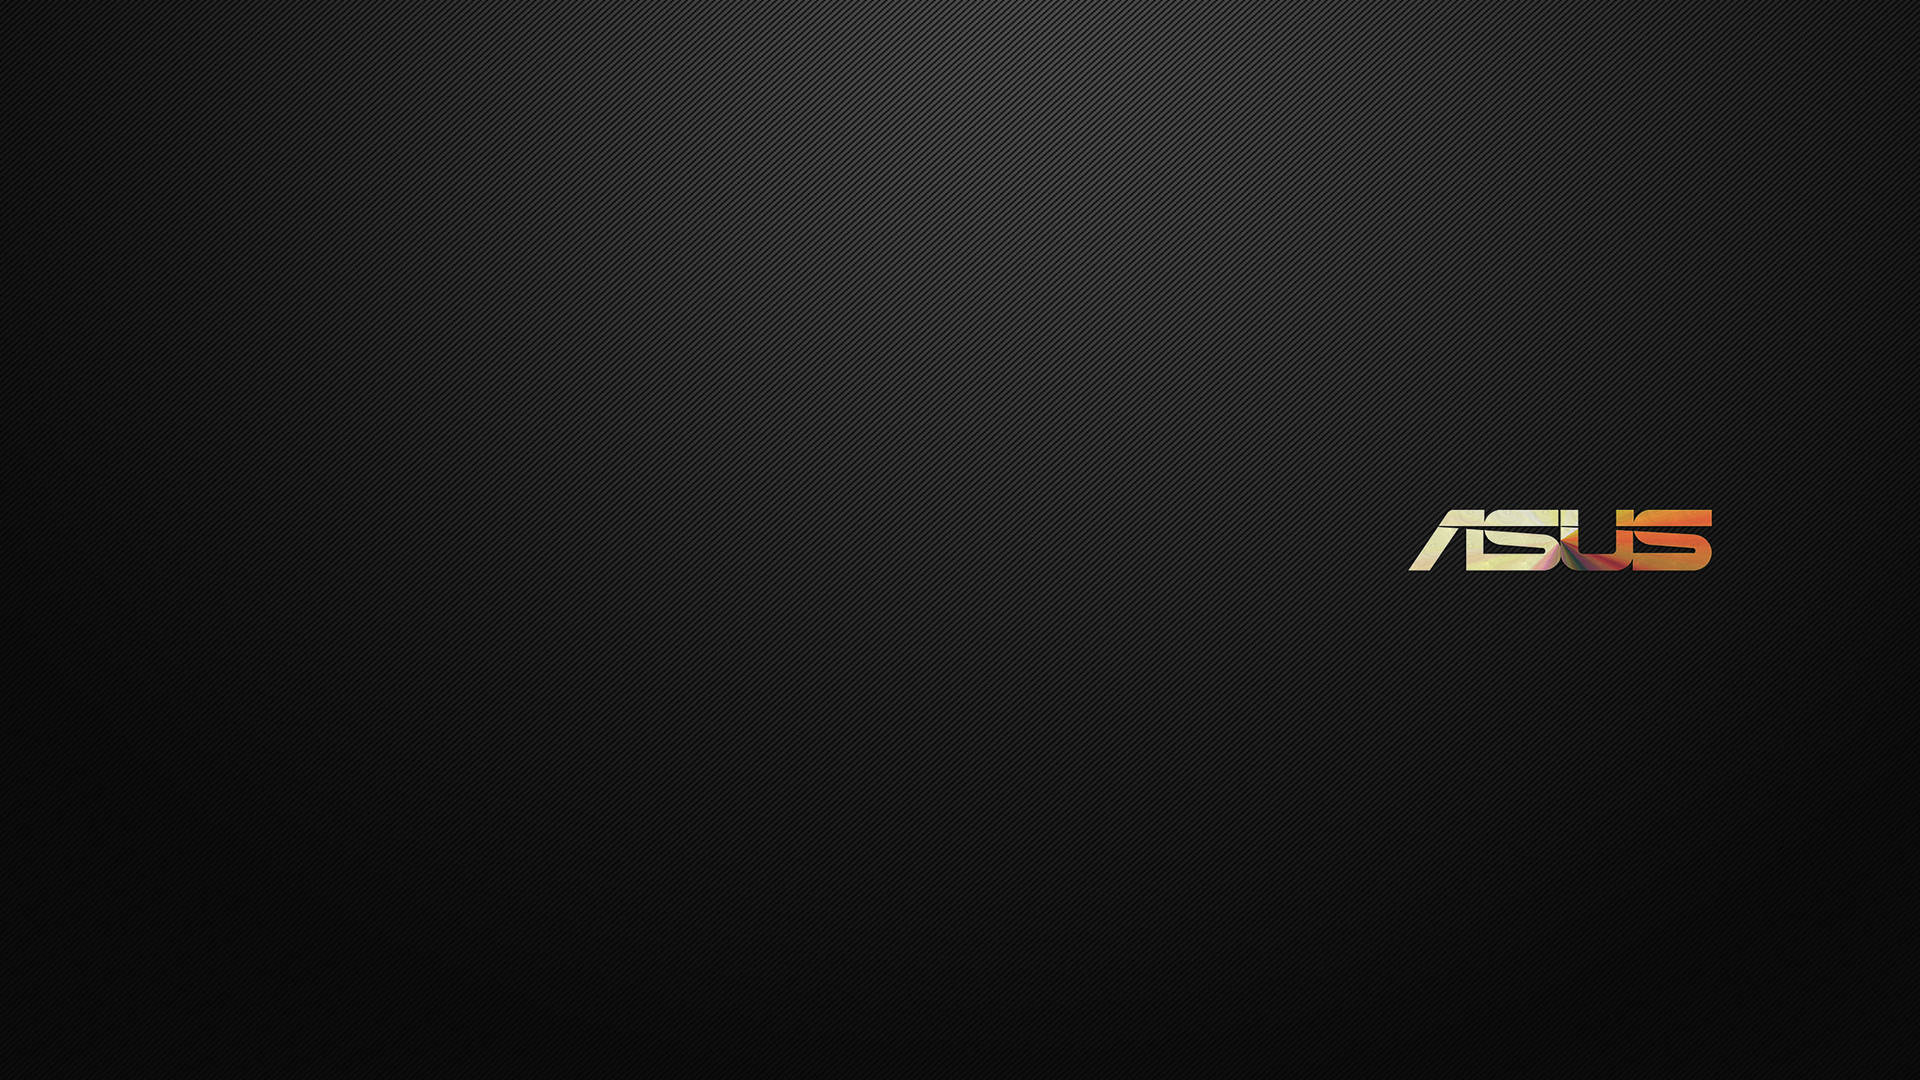 Asus 7680X4320 Wallpaper and Background Image